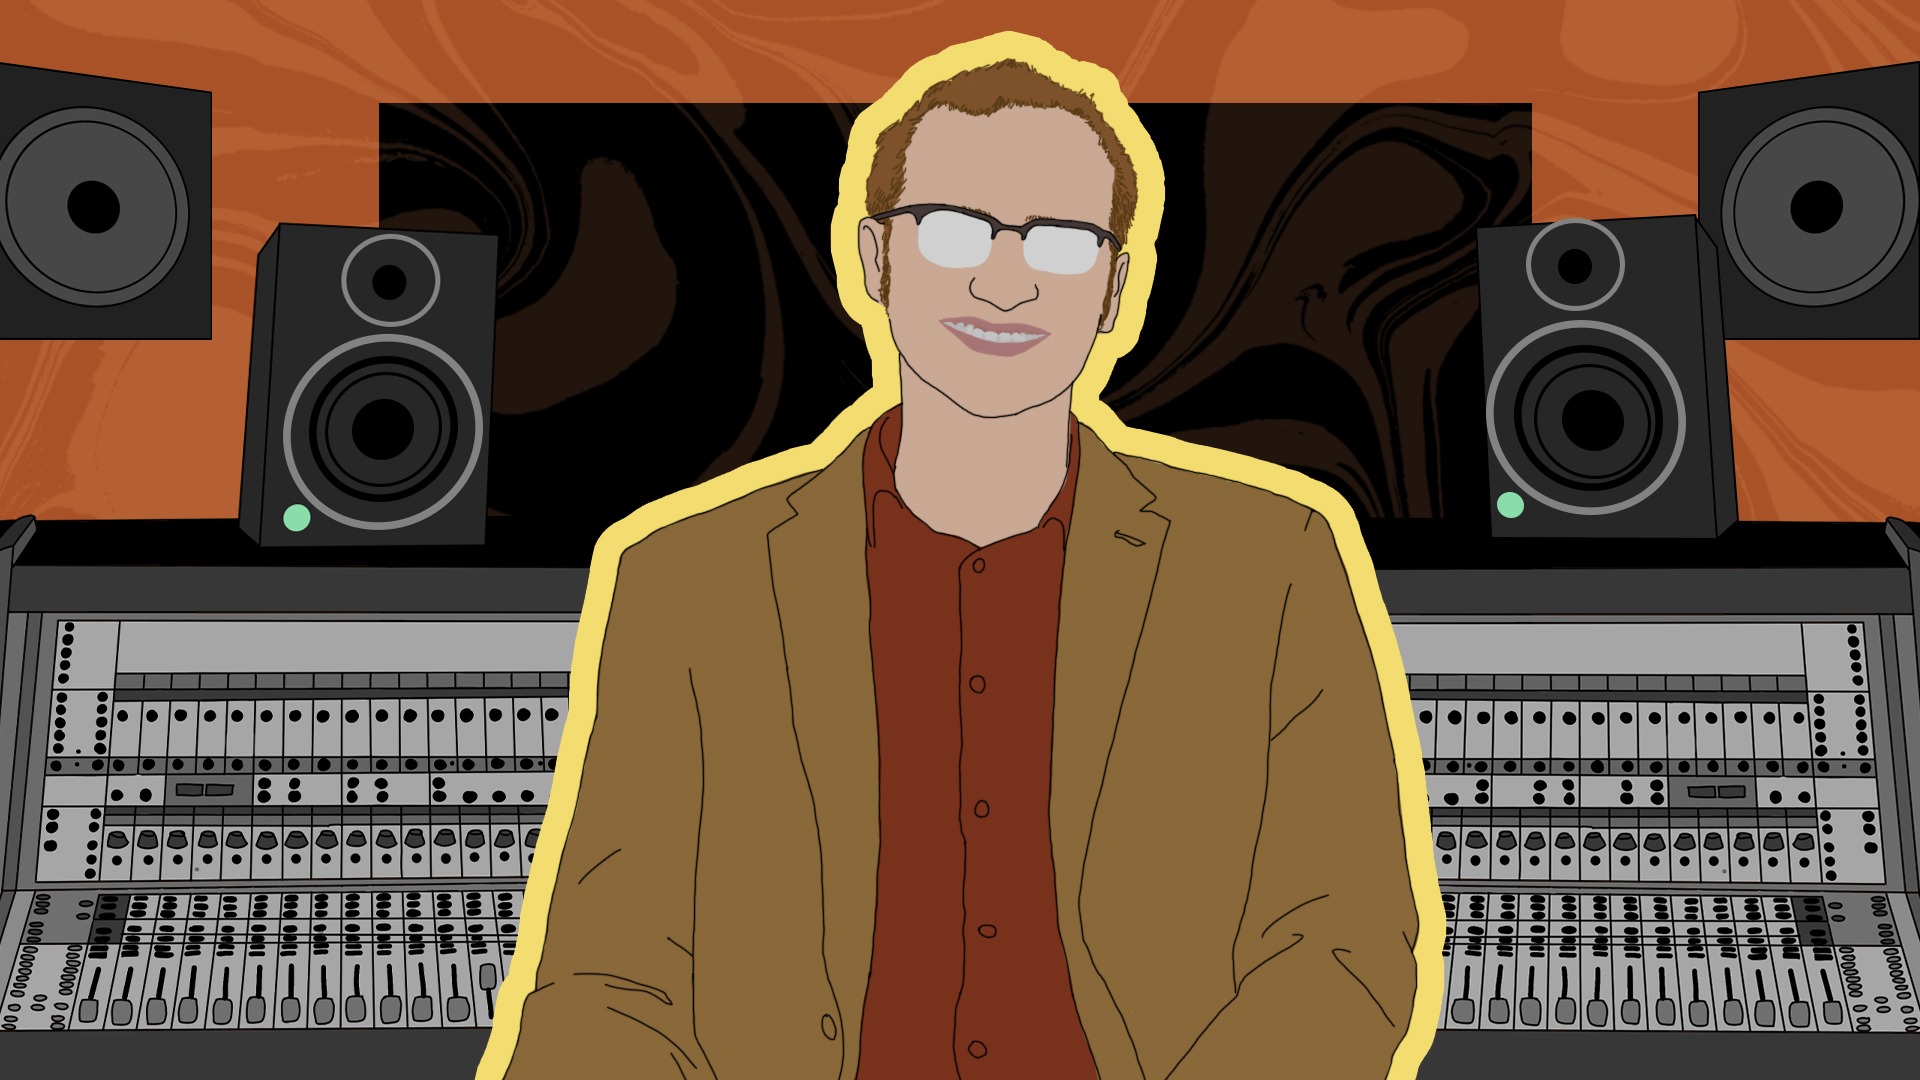 Illustration of Emre Ekici in front of a console